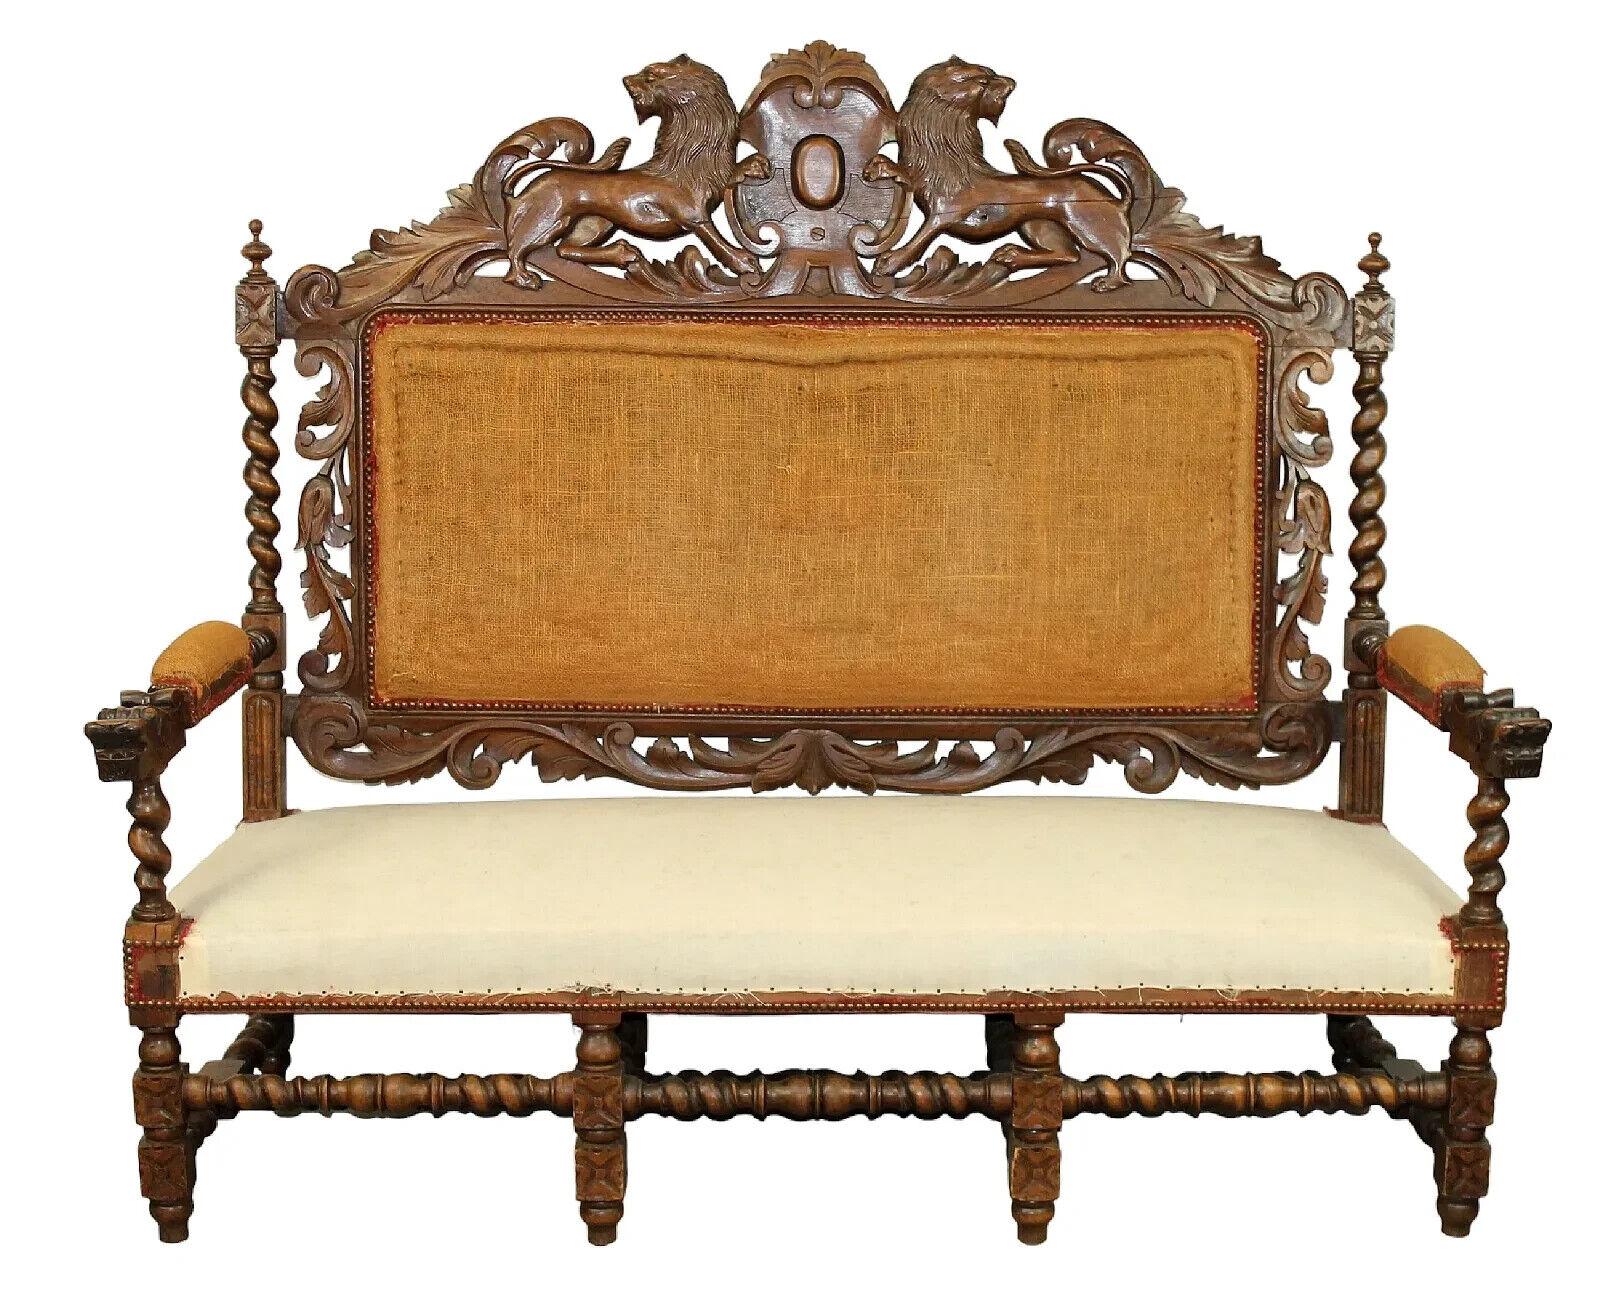 Gorgeous Antique Sofa, French Louis XIII Carved Walnut, Griffins Cabochon Flanking Crest, 1800s, 19th Century!

This antique French Louis XIII sofa is a true masterpiece, carved from beautiful walnut wood with intricate details such as griffins